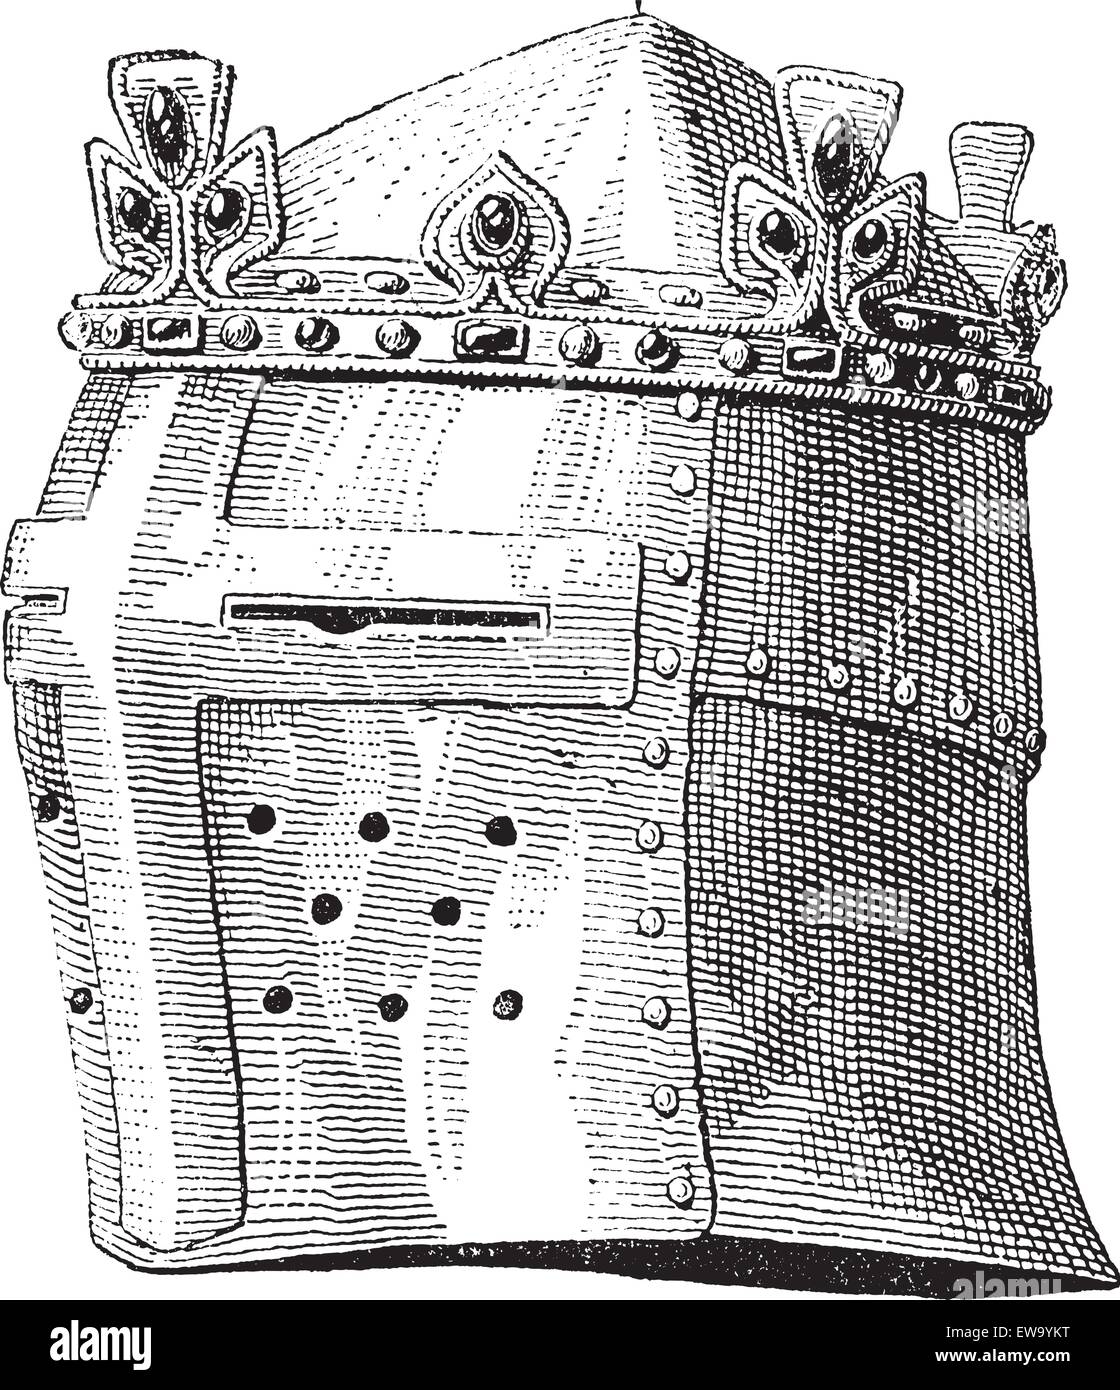 Helmet or galea worn by Louis IX in the battle of the Massoure vintage engraving. Old engraved illustration of helmet worn by Louis IX. Stock Vector